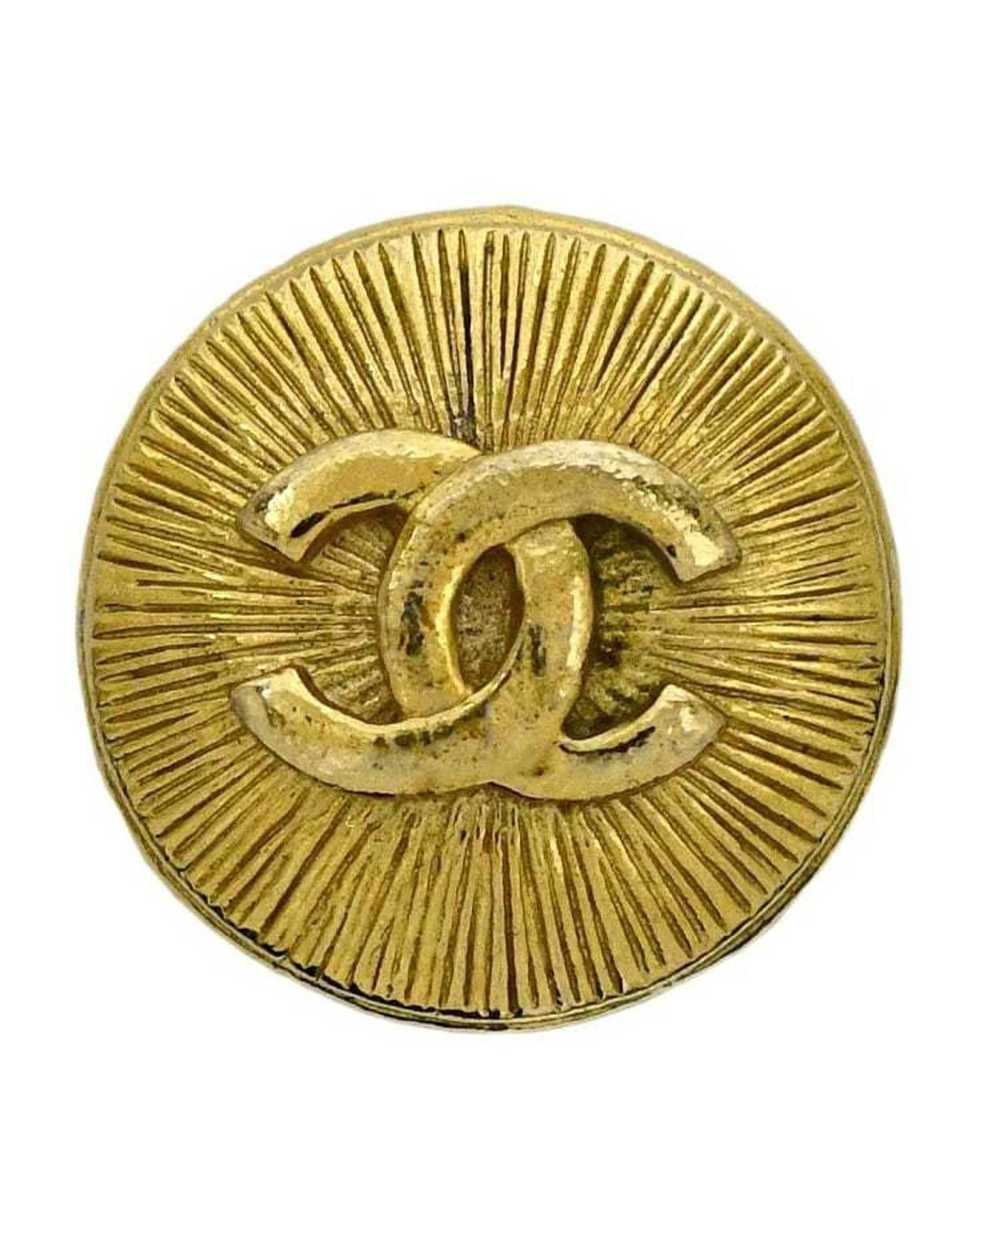 Chanel Luxurious Gold-Plated Coco Mark Pin Brooch - image 1